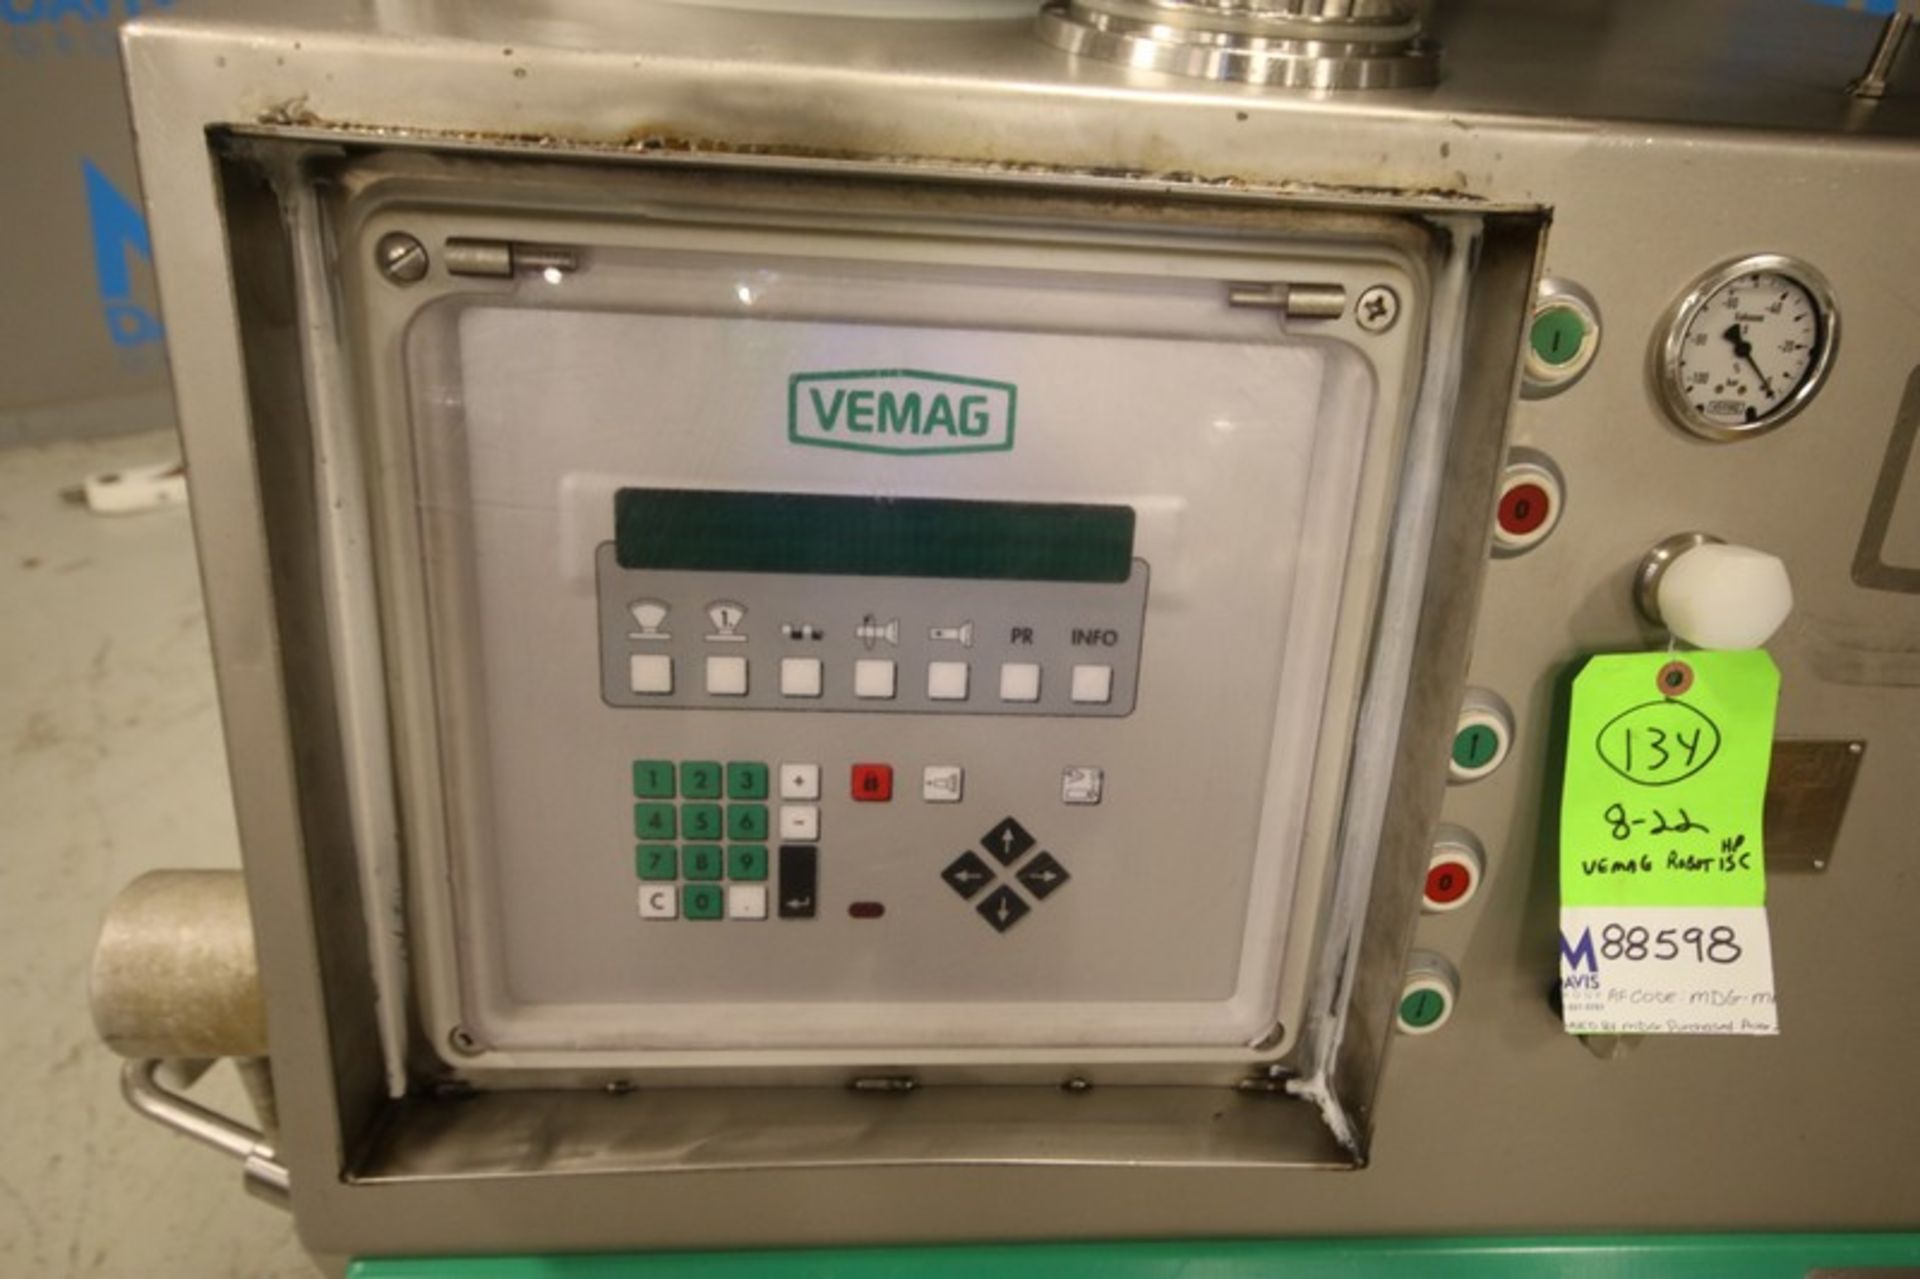 Vemag S/S Vacuum Stuffer, Model Robot HP15C, SN 144 1506, with Double Screws, On Board Tote - Image 7 of 11